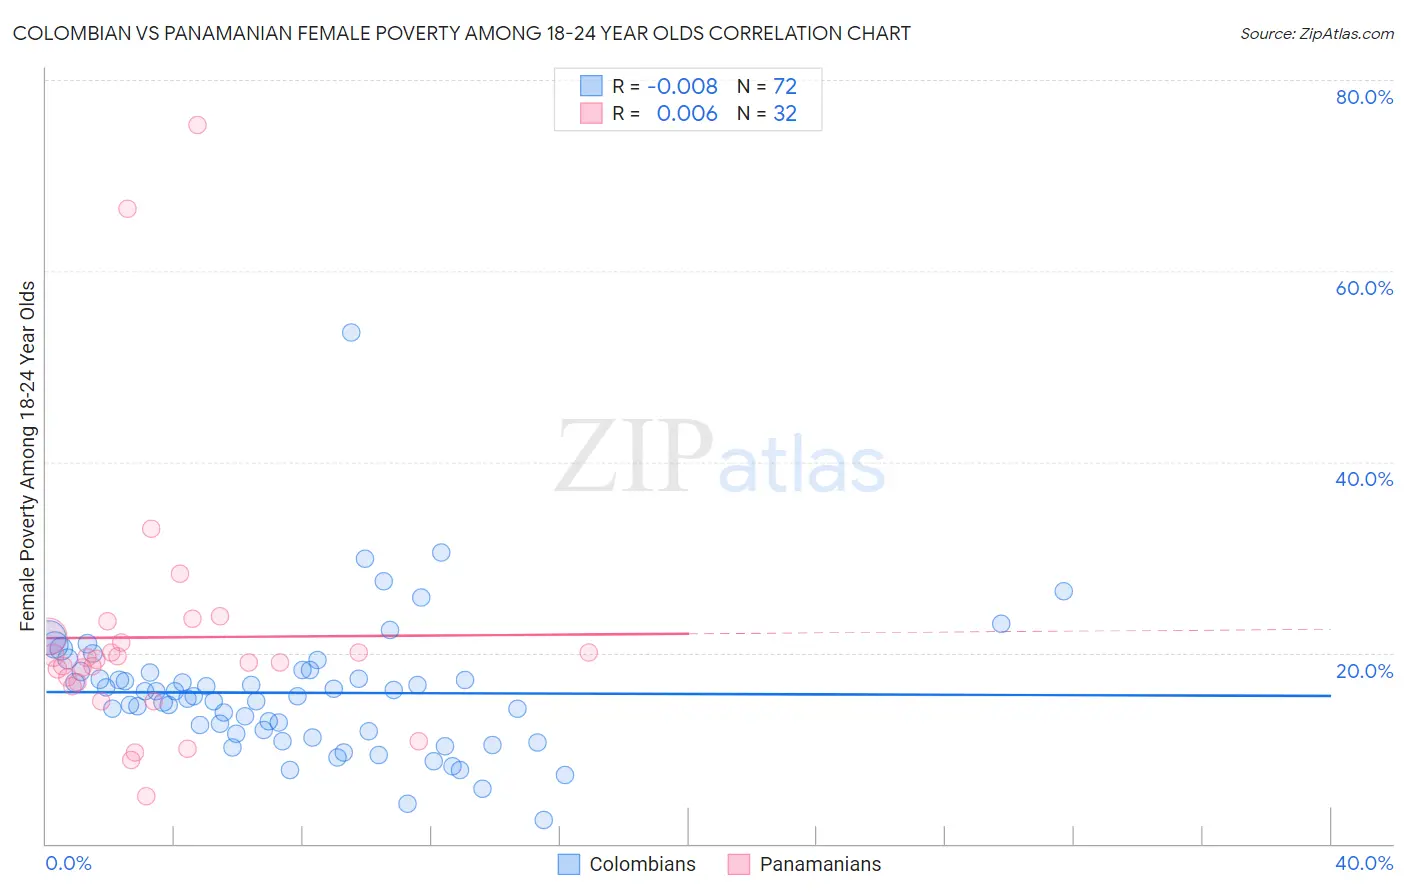 Colombian vs Panamanian Female Poverty Among 18-24 Year Olds